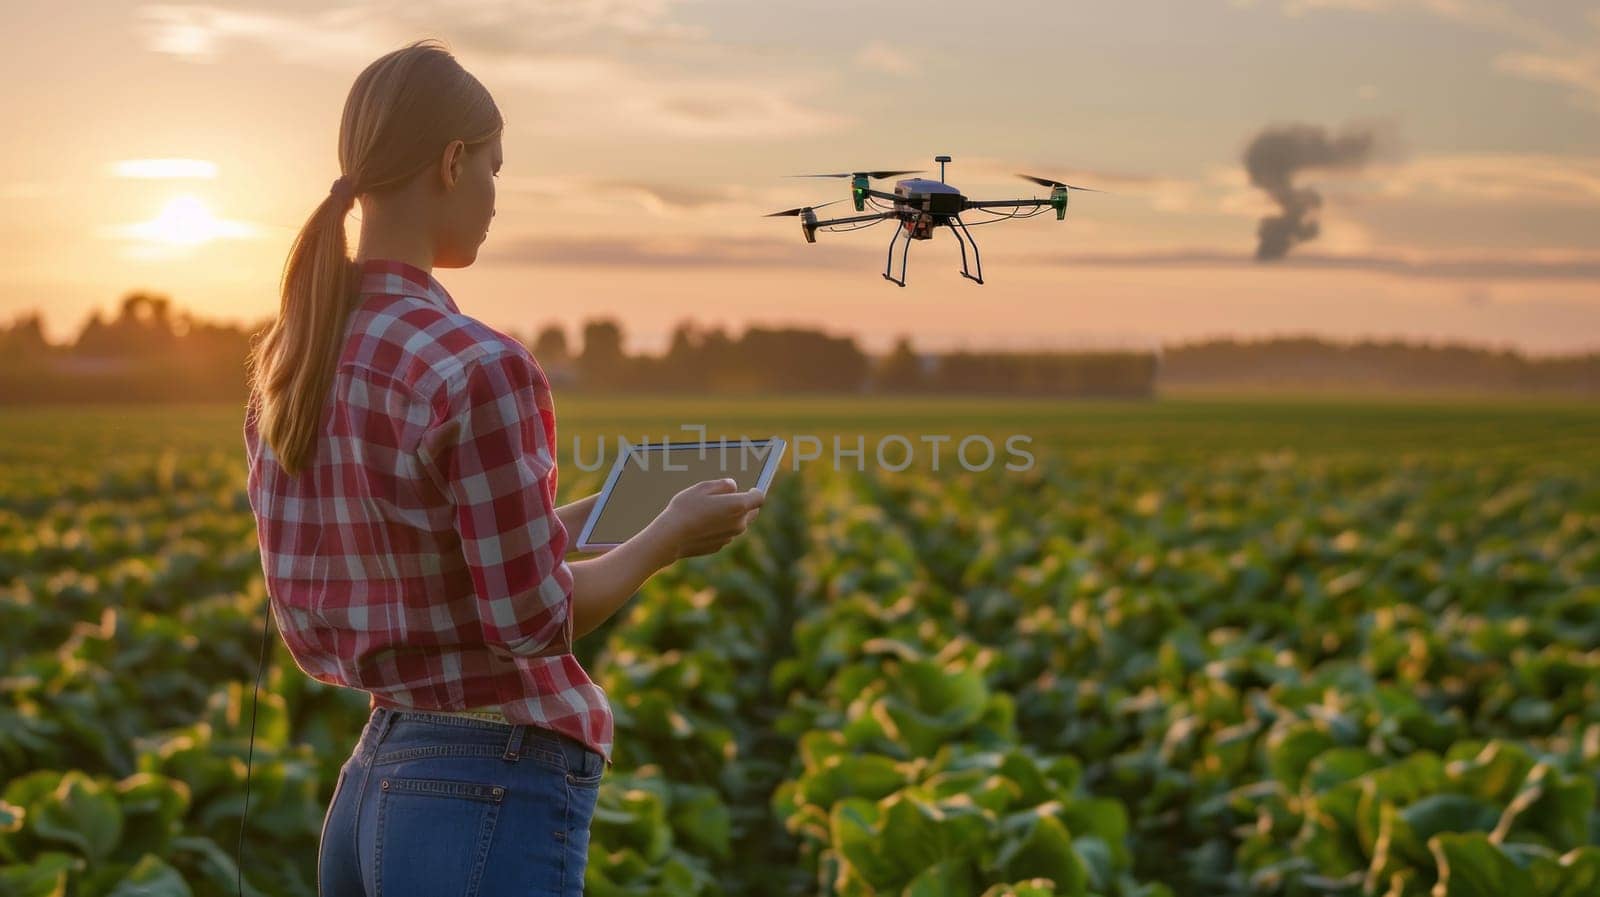 A woman is standing in a field with a drone flying above her by golfmerrymaker